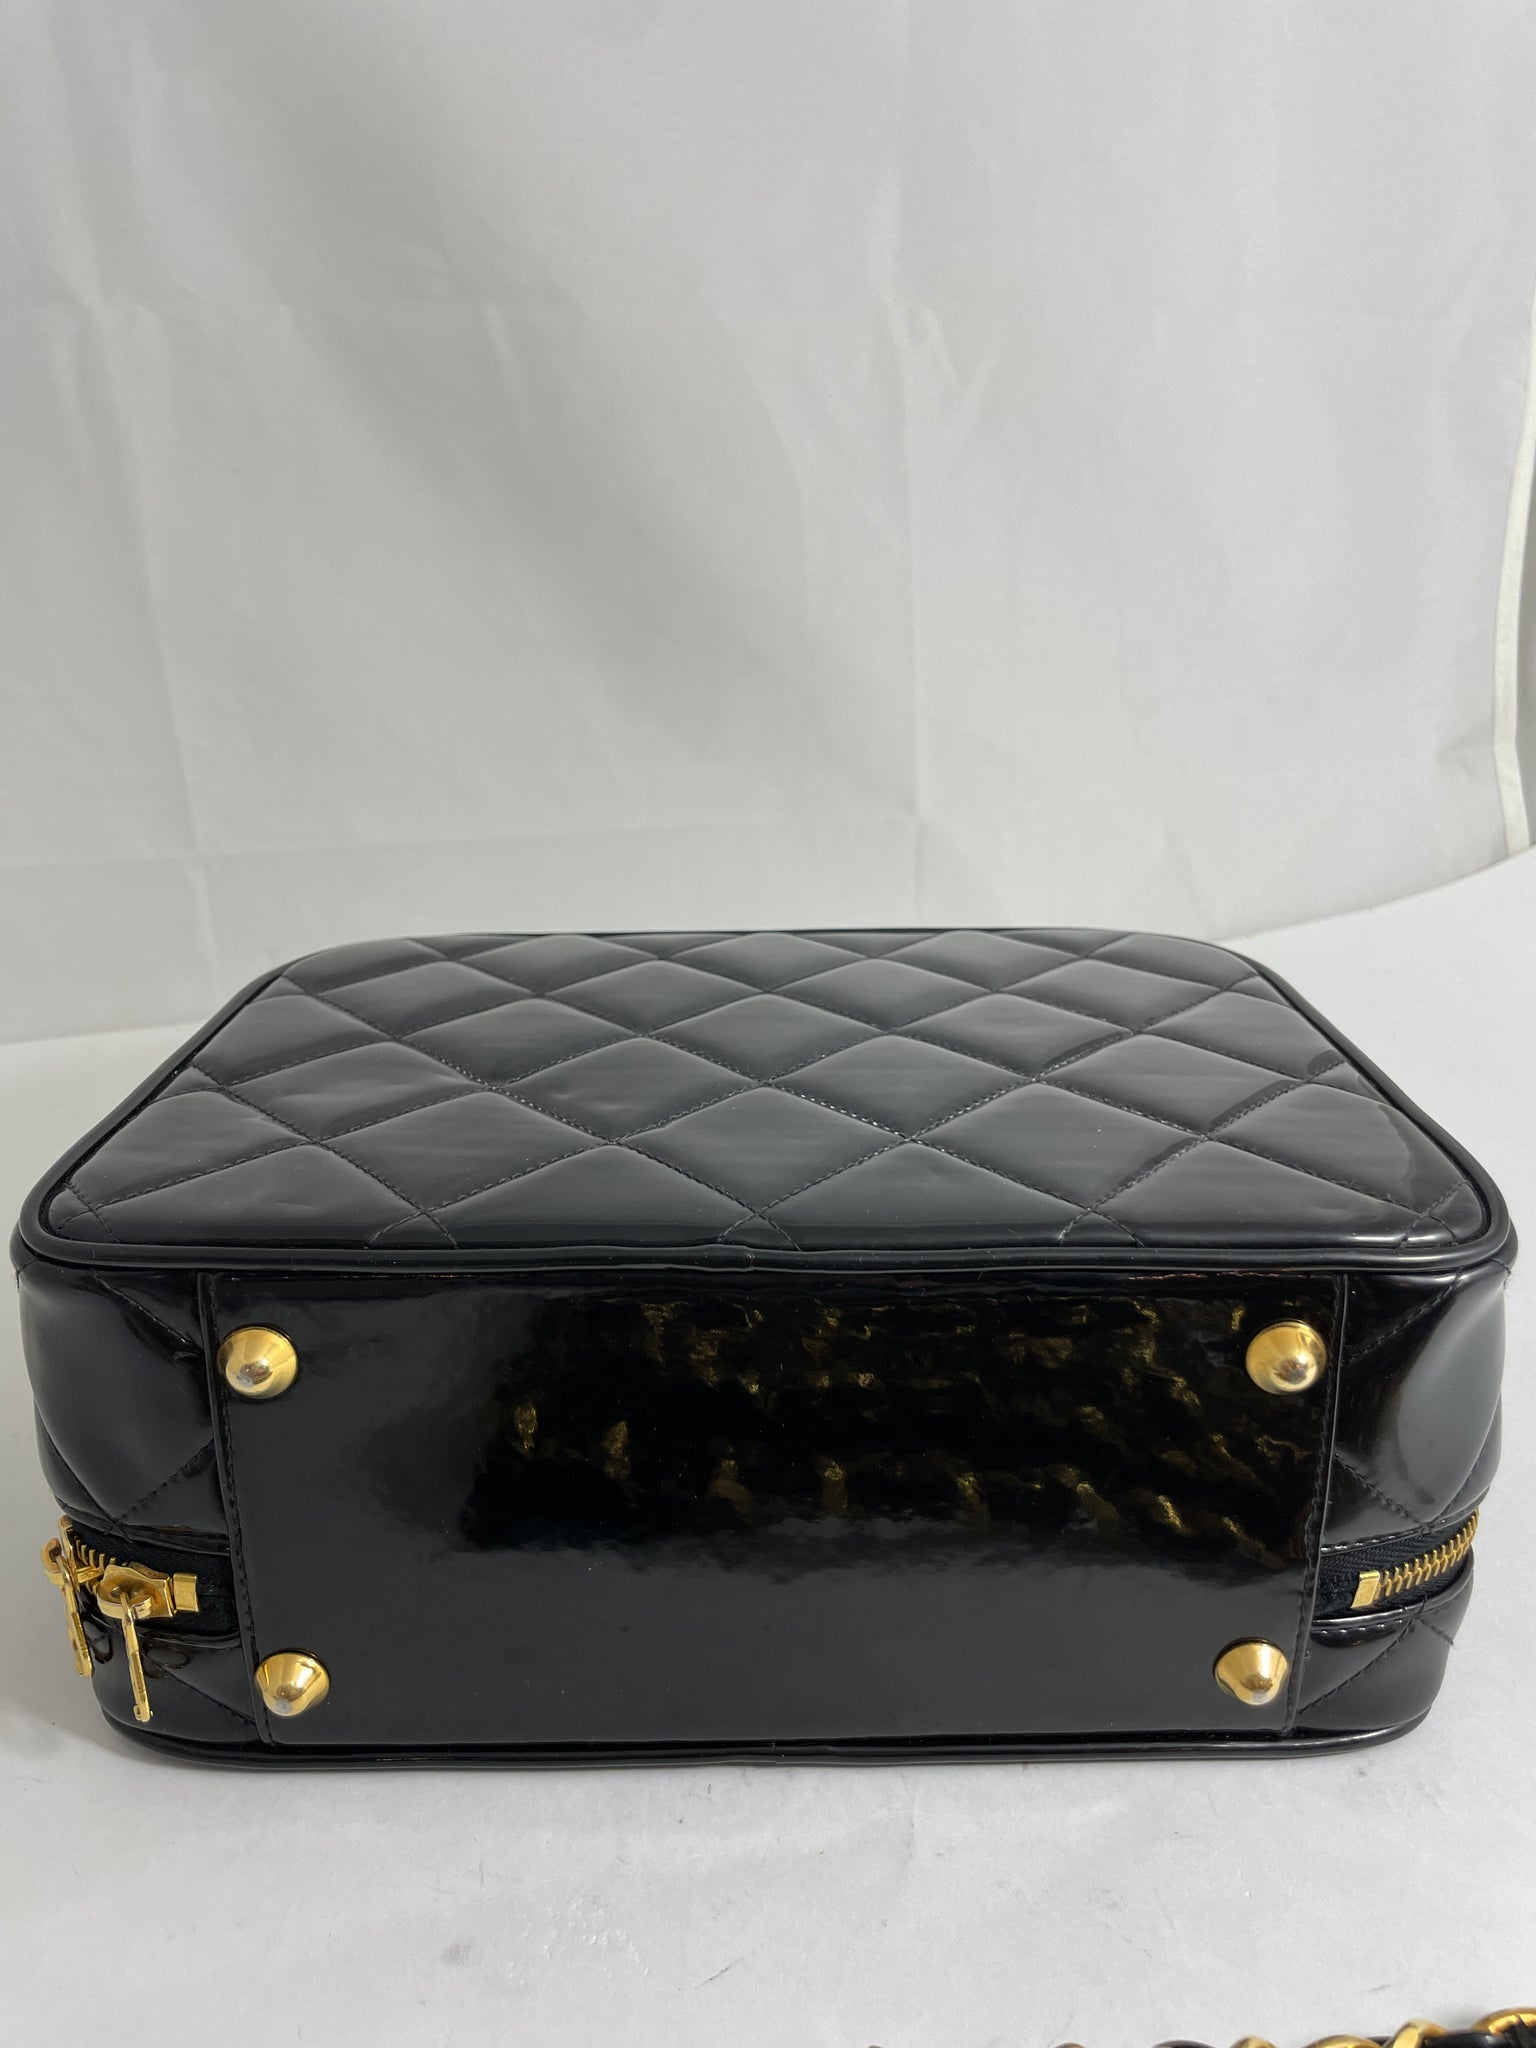 CHANEL, Bags, Rare Vintage Chanel Lunchbox Style Bag